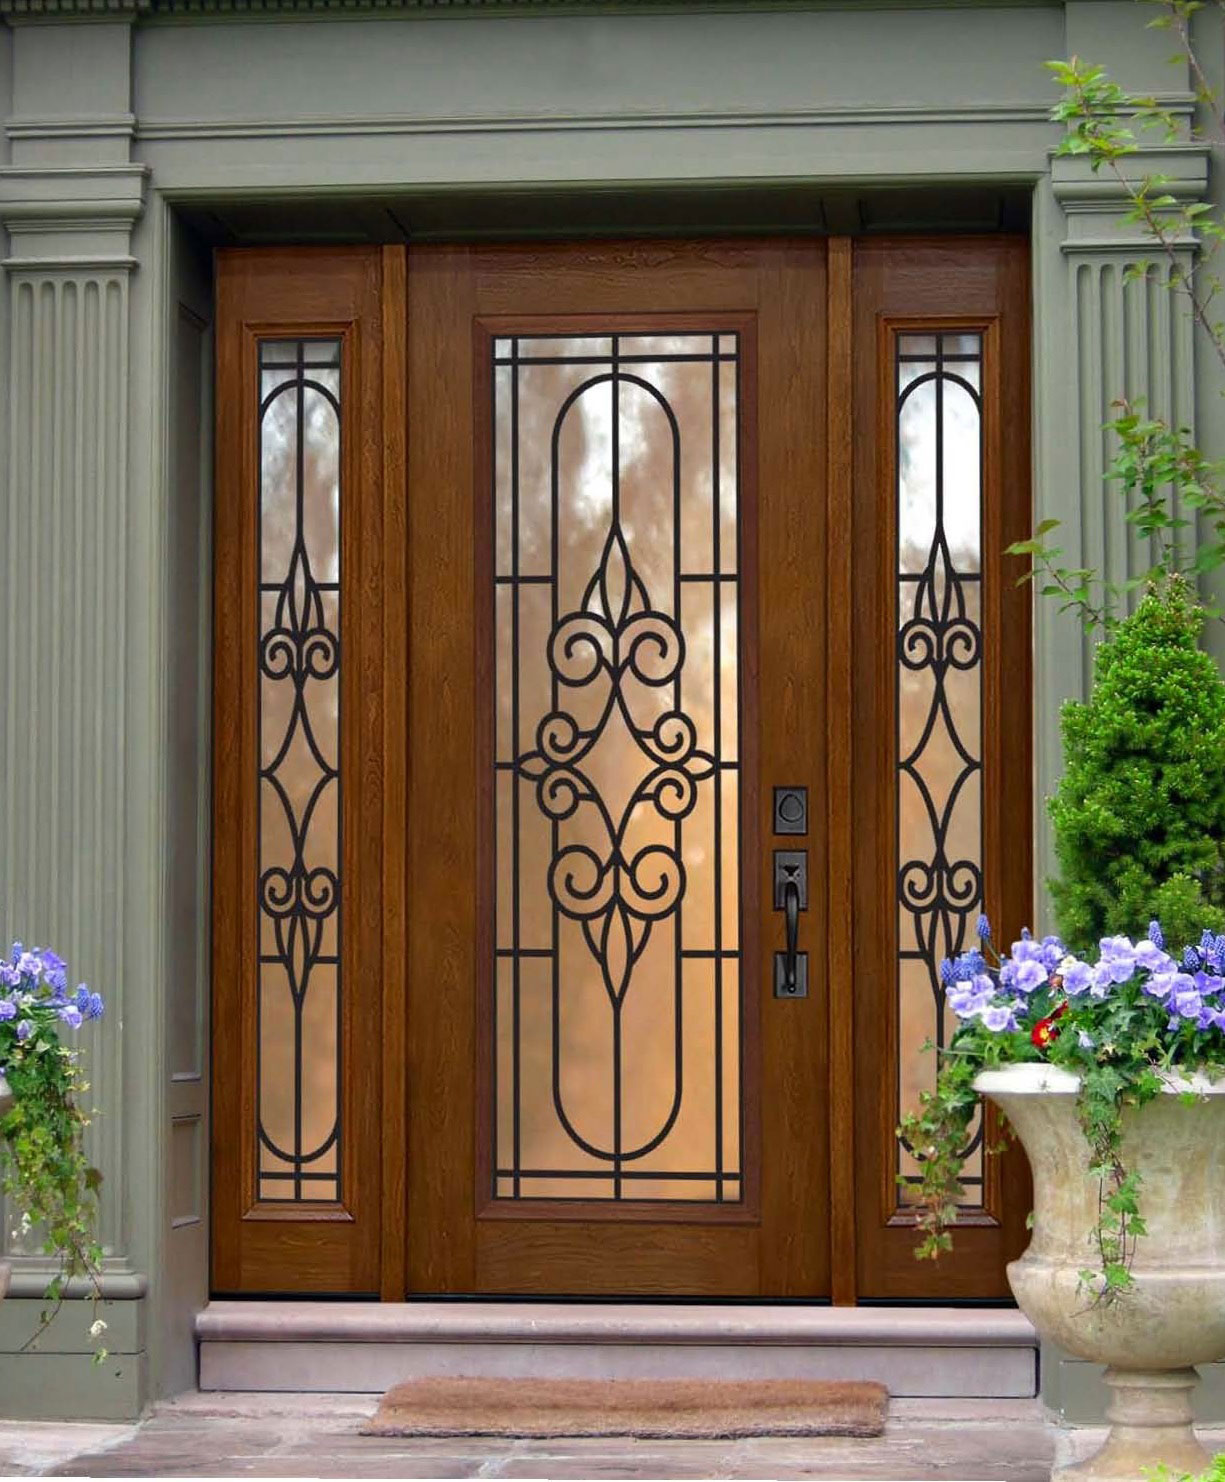 Entrance With Ideas Inspiring Entrance With Front Door Ideas Wooden Made Applying Black Door Lever Also Combined With Glass Custom And Completed With Soft Doormat Exterior Front Door Ideas: The “Face” Of The House